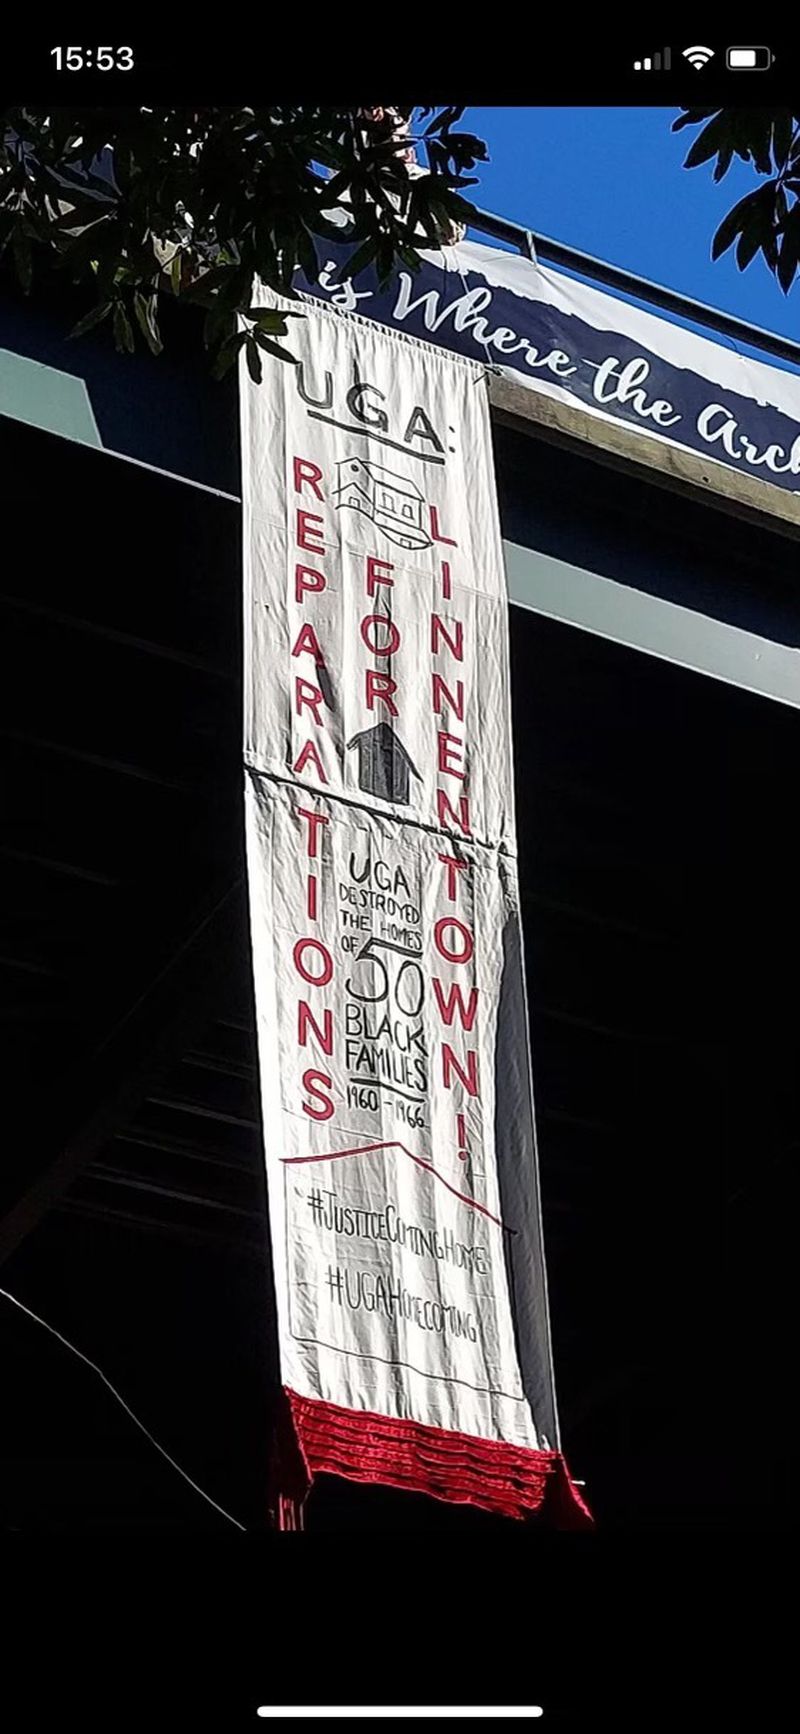 A small group of University of Georgia students flew this banner over a pathway leading to Sanford Stadium during the UGA-Kentucky game on Oct. 16, calling for reparations for Linnentown.